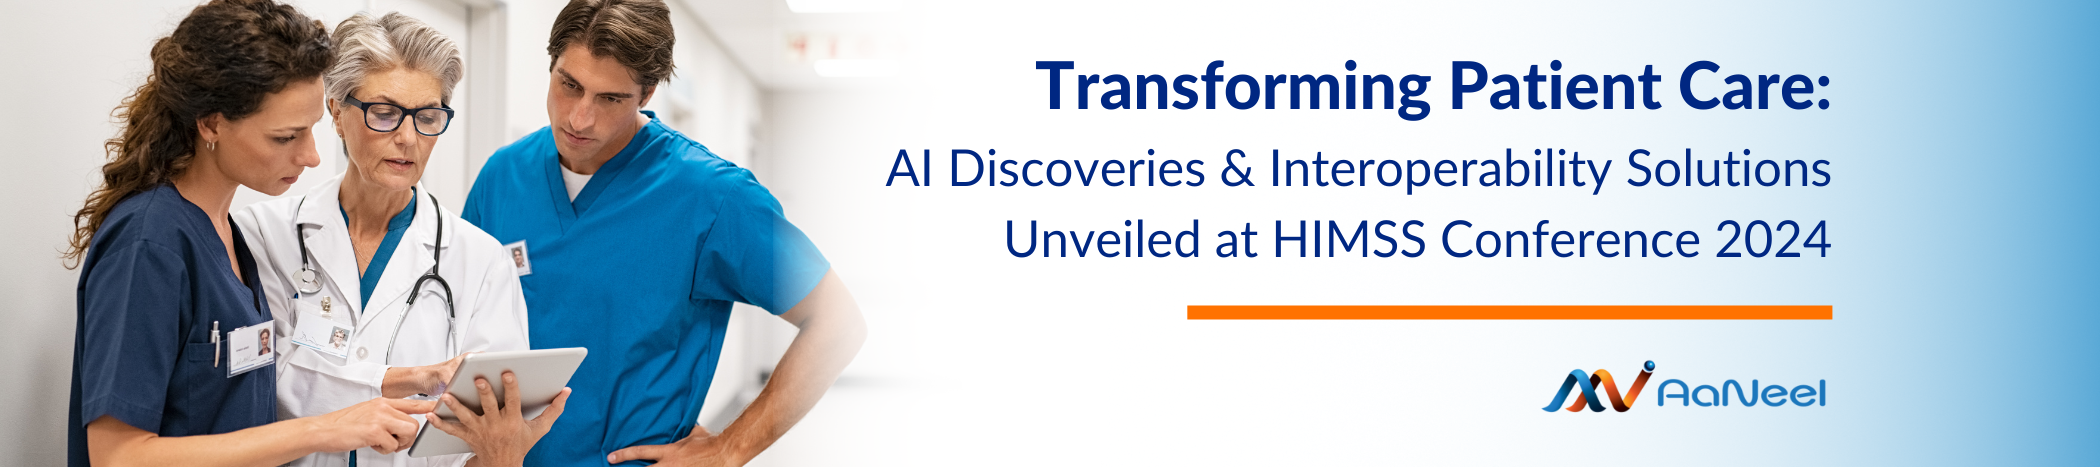 Transforming Patient Care: AI Discoveries and Interoperability Solutions Unveiled at HIMSS Conference 2024